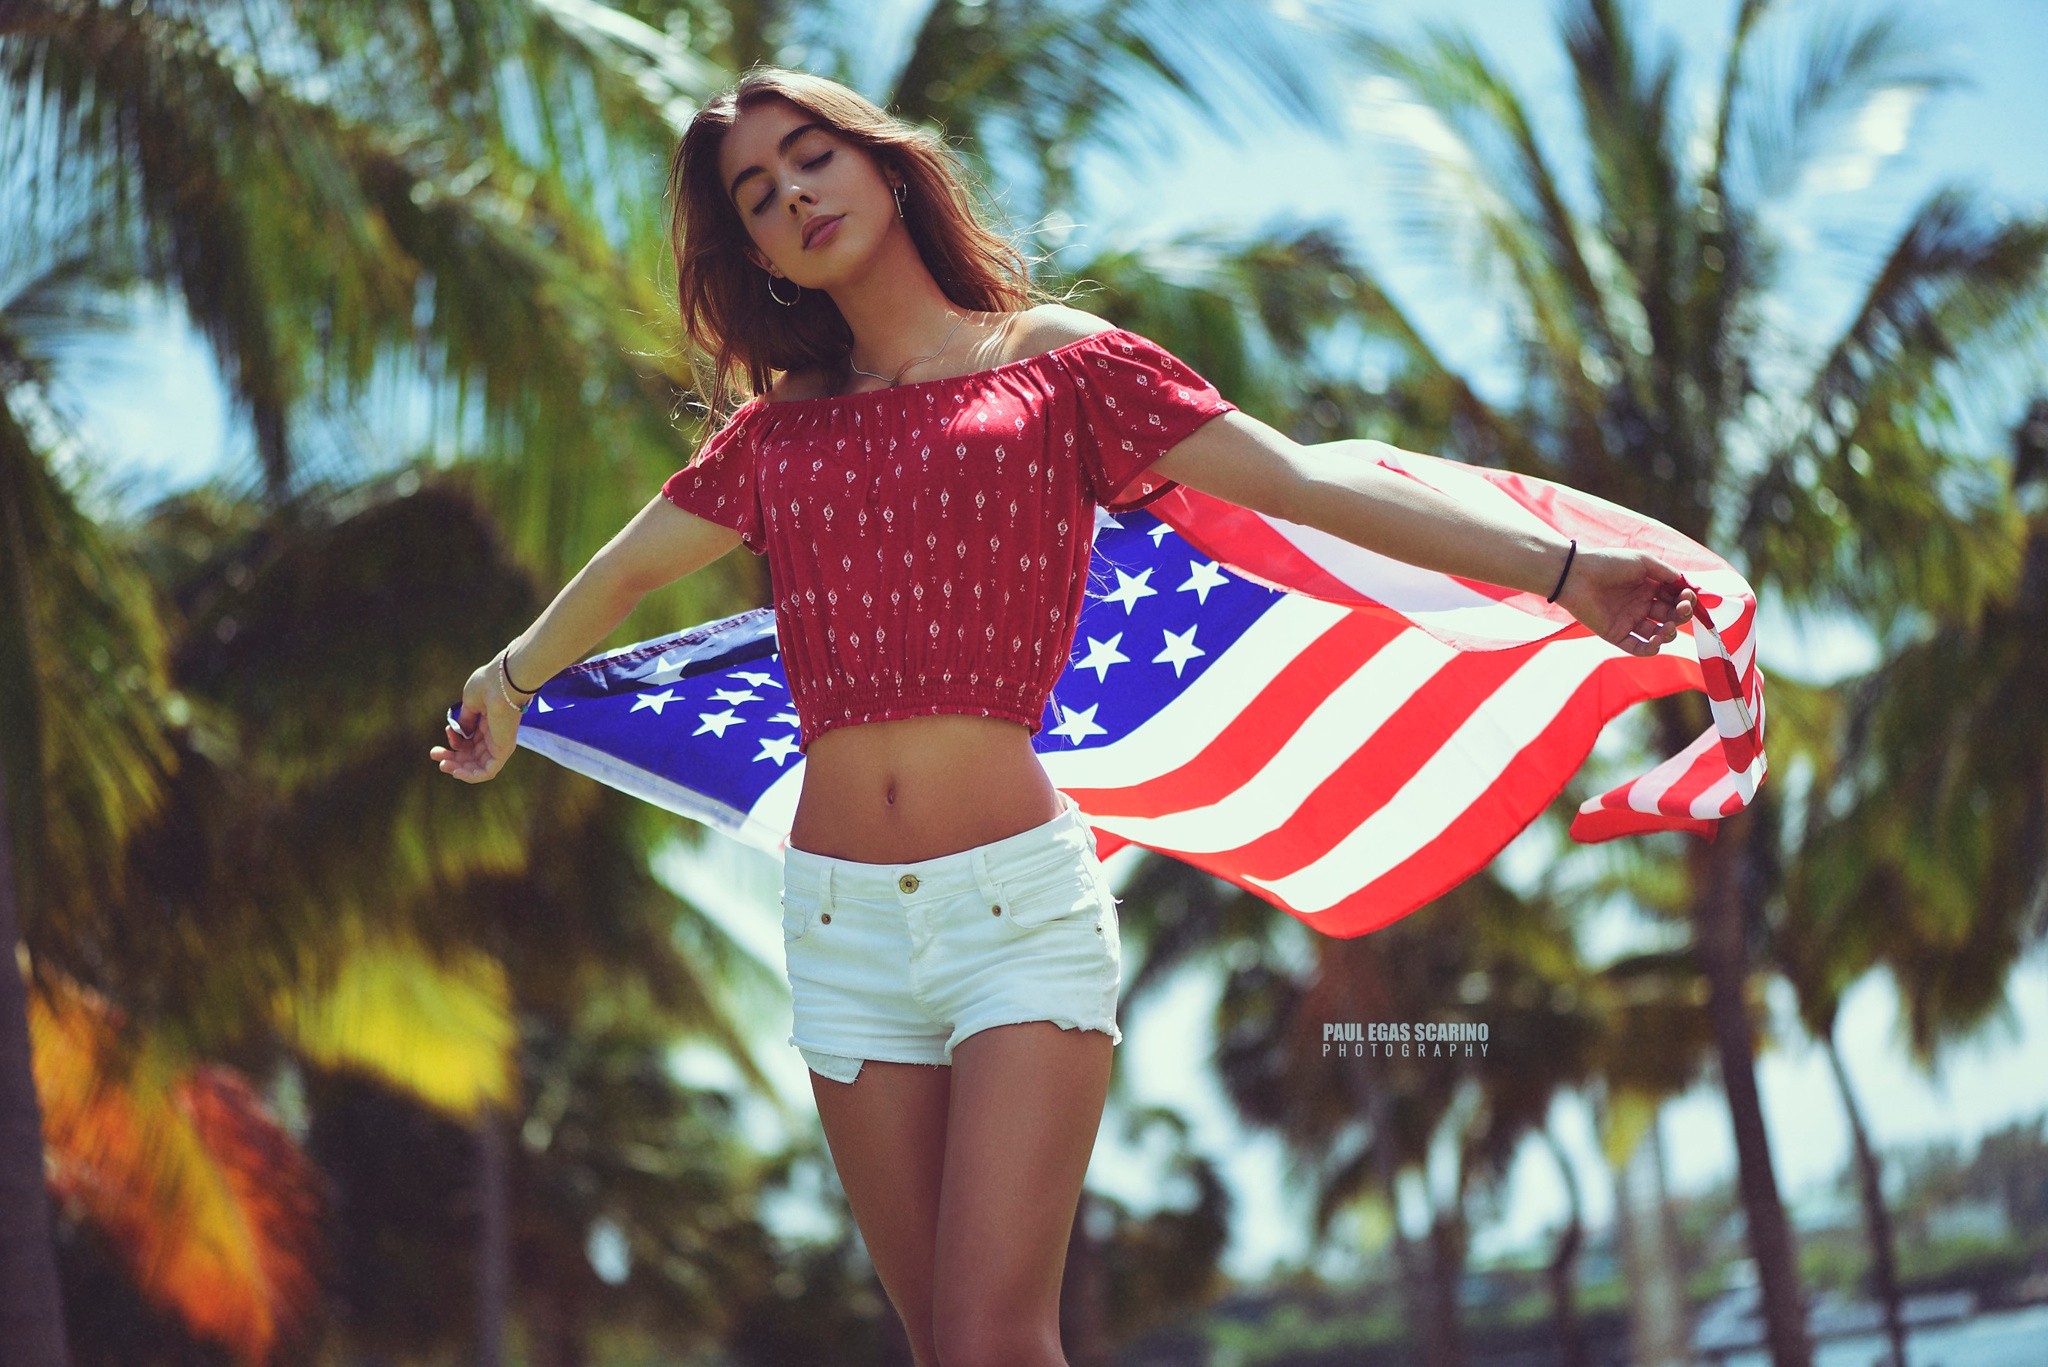 People 2048x1367 Chris Calero women portrait flag closed eyes palm trees jean shorts belly tanned Paul Egas Scarino wristband watermarked